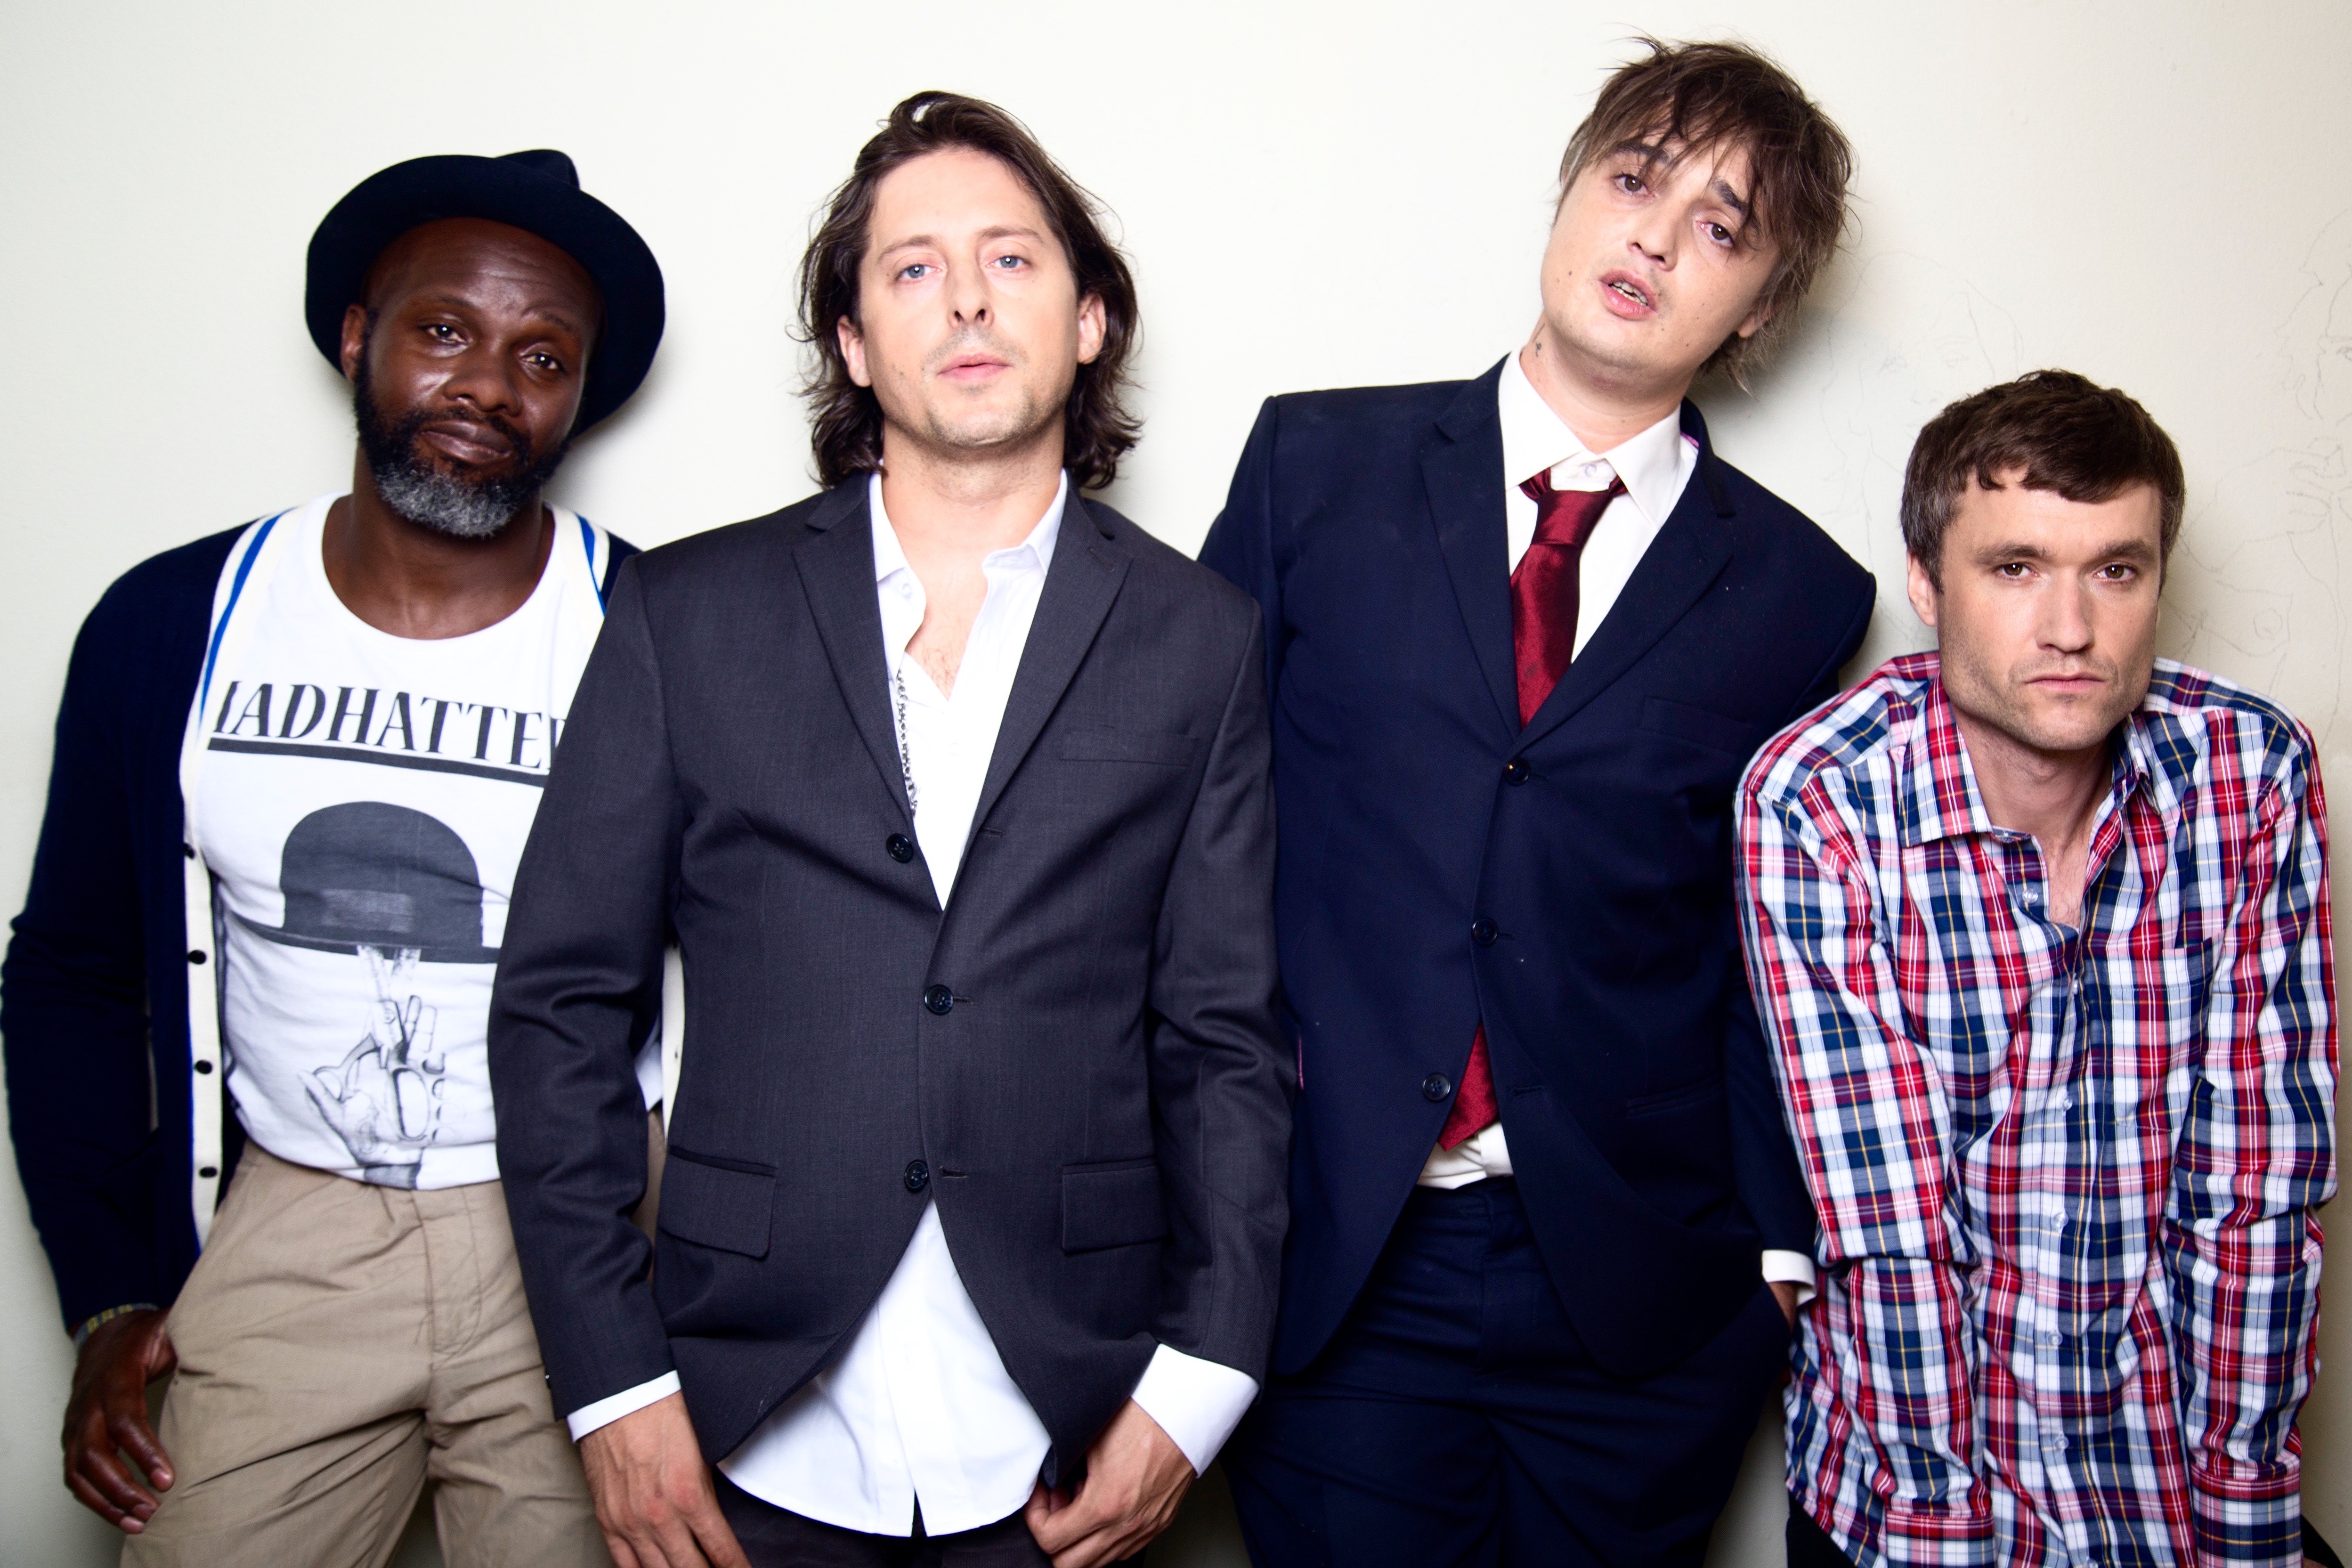 The Libertines, who are playing at this year's Clockenflap.